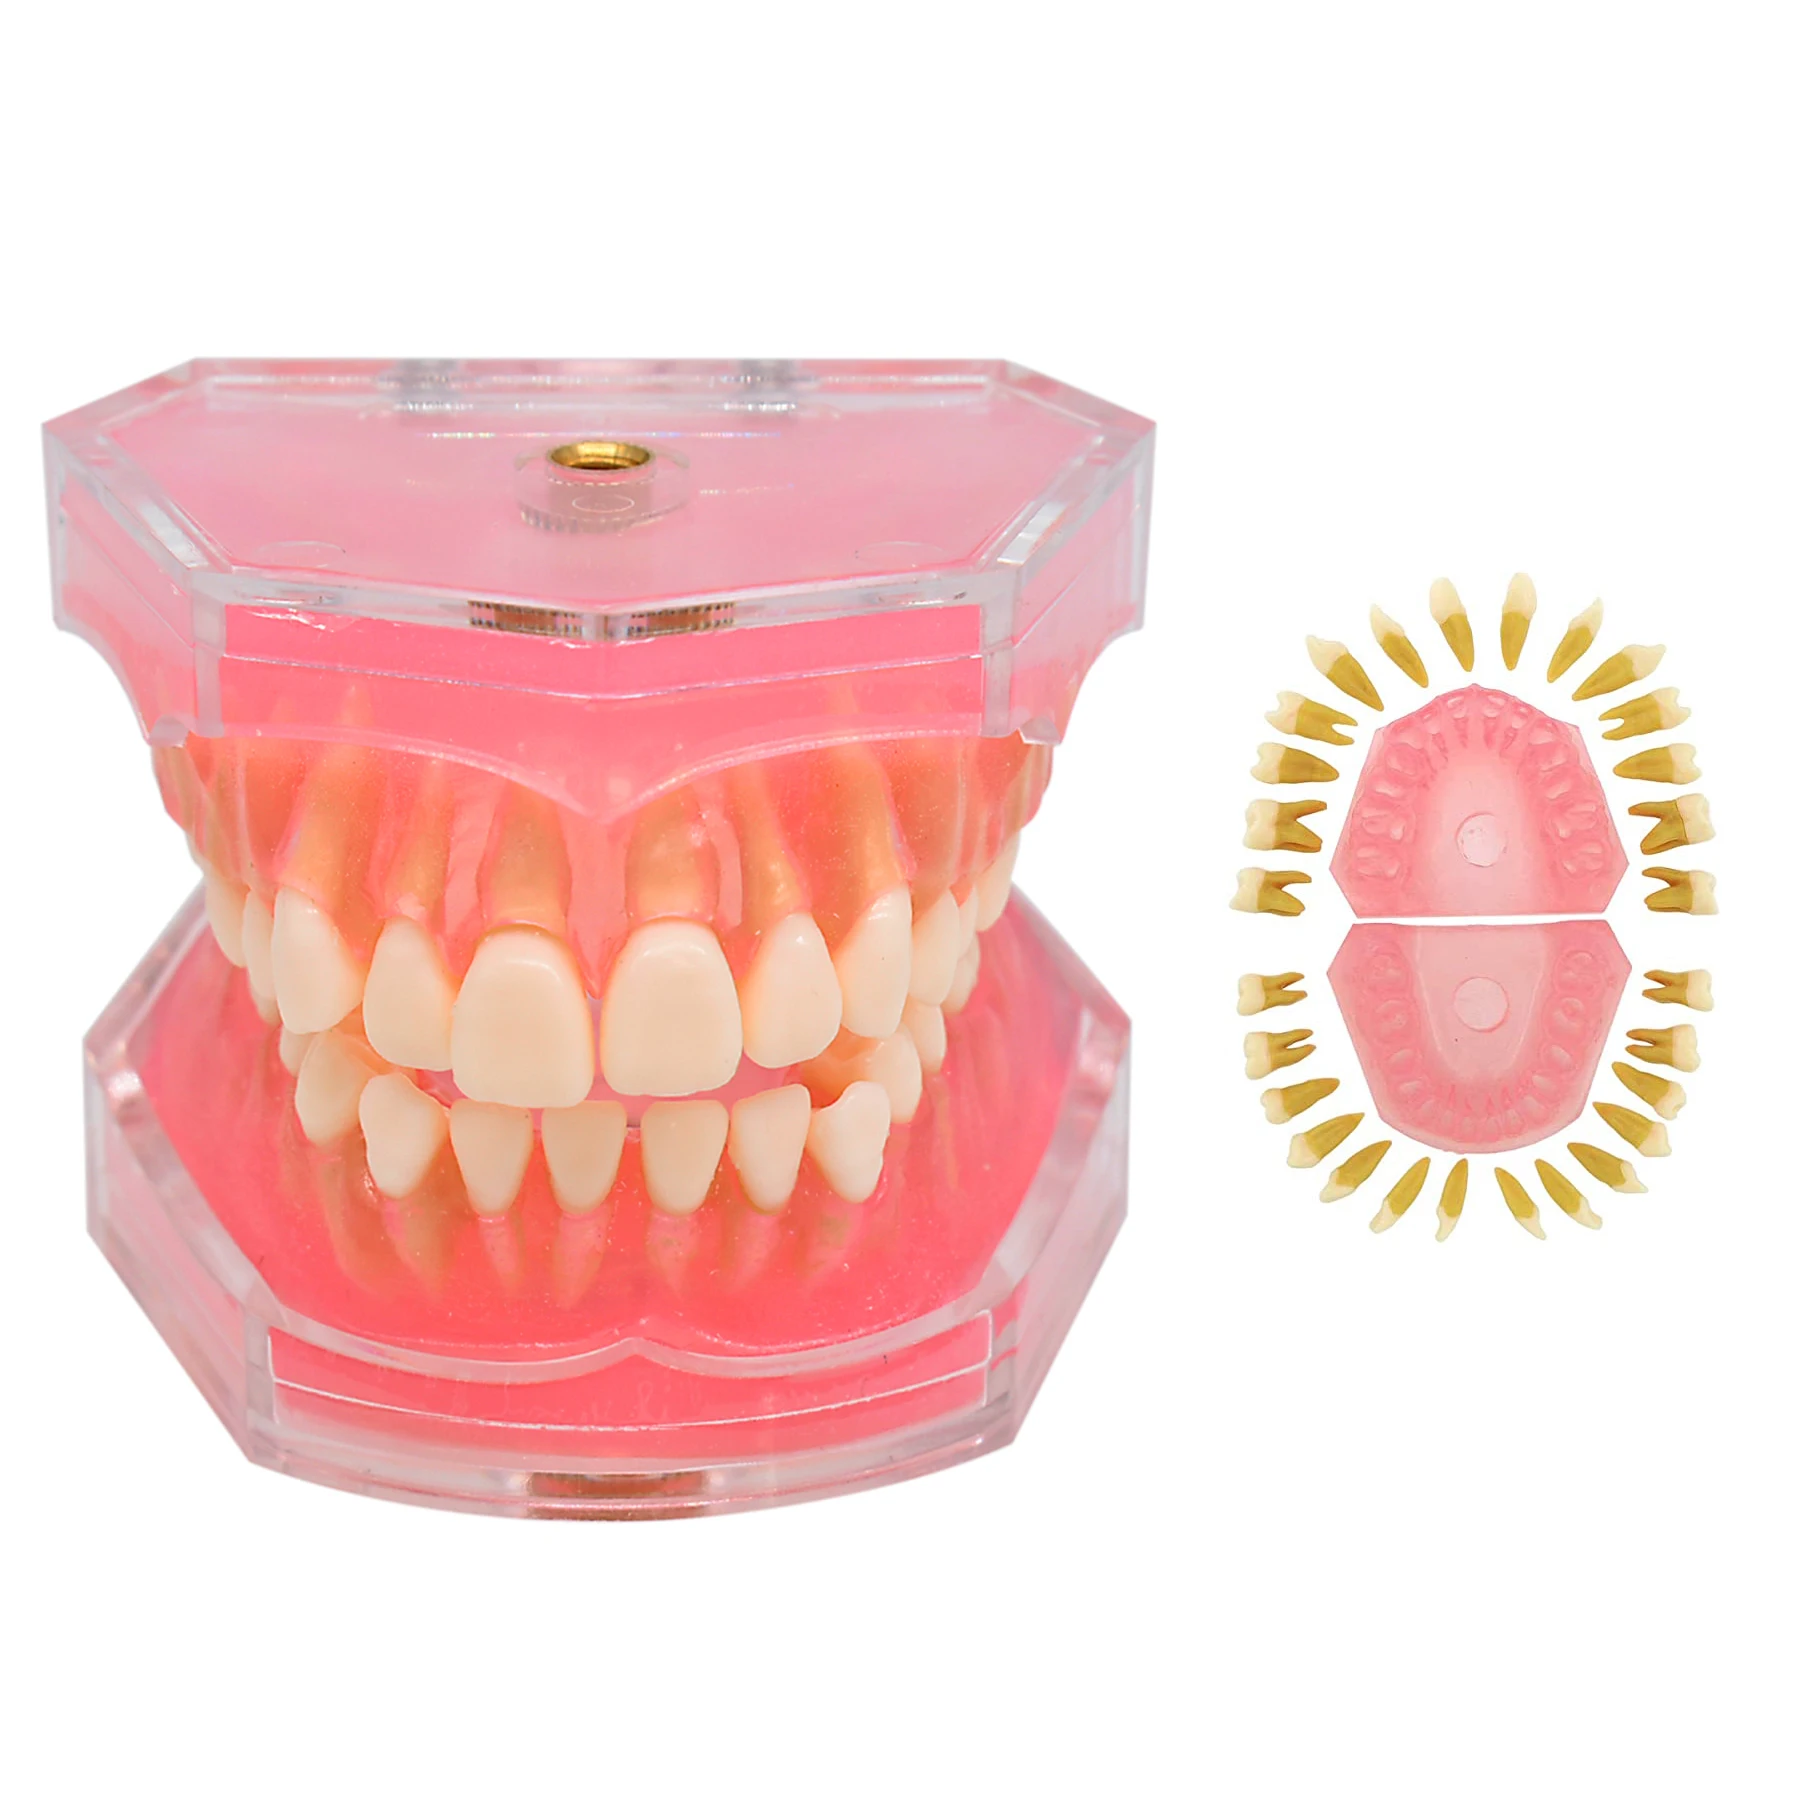 Dental Standard Model Removable Teeth With Soft Gums for Study Teaching